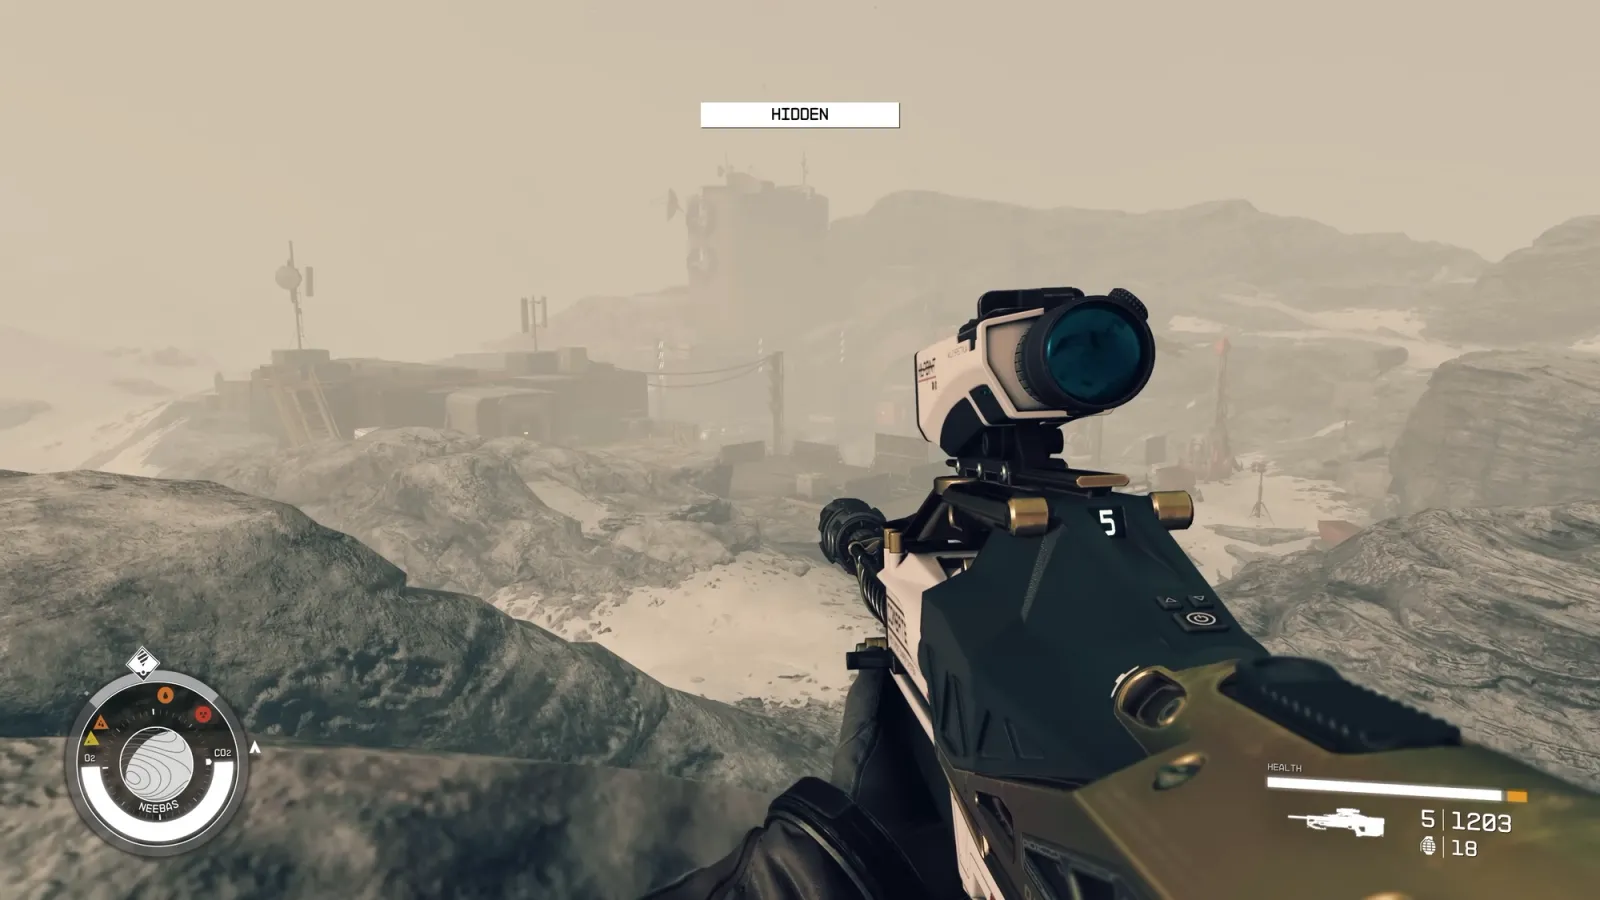 player stands patiently aiming a sniper rifle